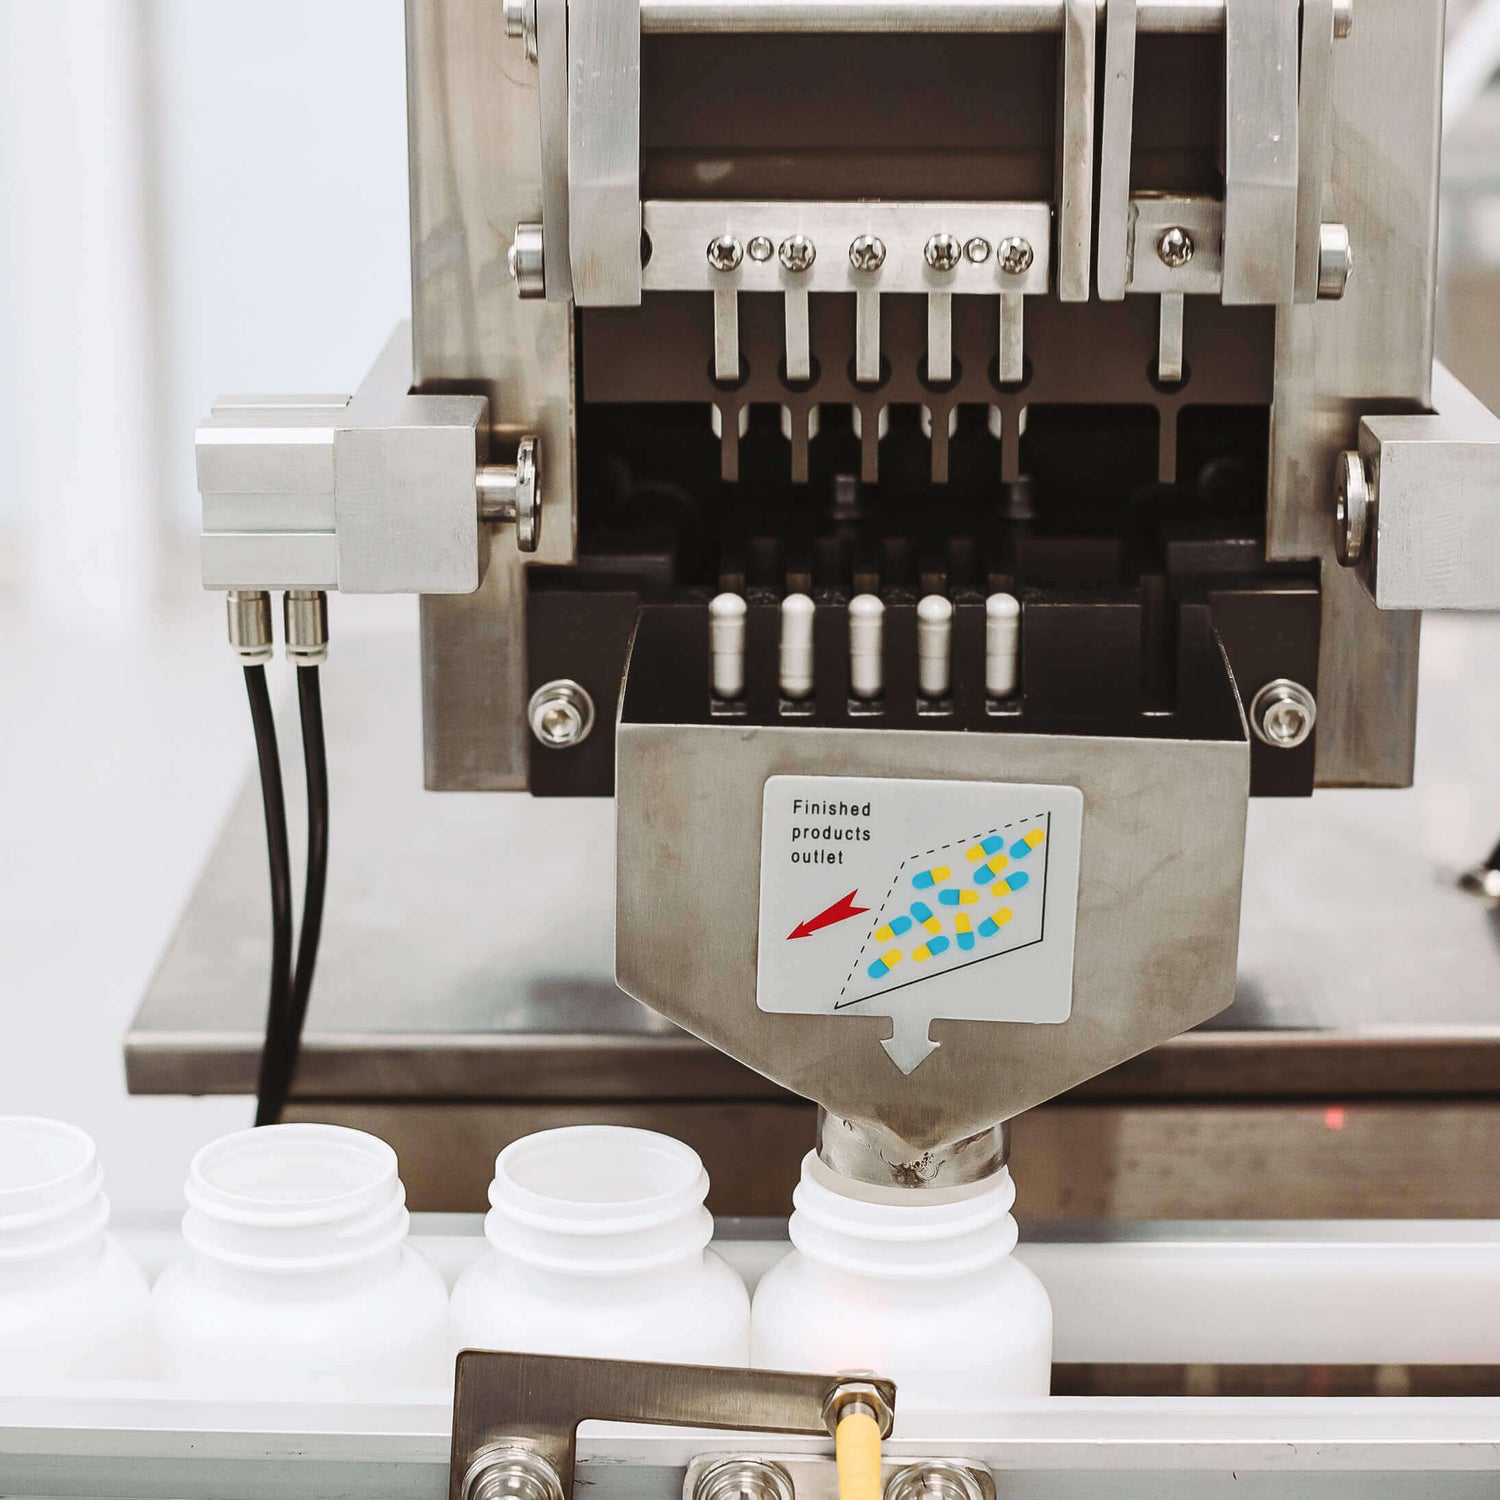 We believe the best way to oversee quality is to produce our dietary supplements ourselves. Our ISO 8 clean room is a GMP-compliant facility approved by Health Canada. 